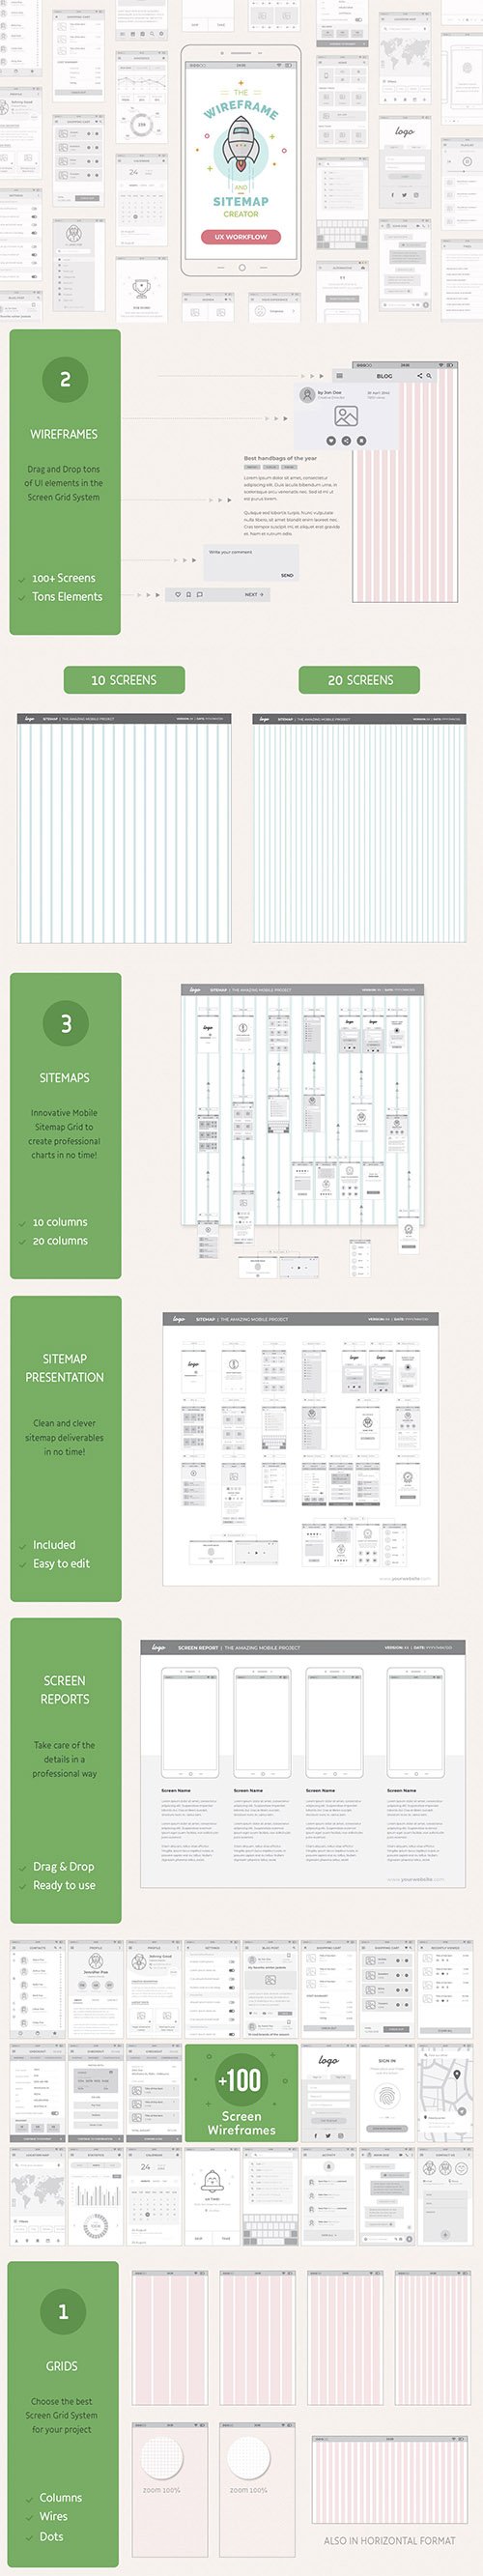 Download UX Workflow - Mobile Wireframe and Sitemap Creator ...